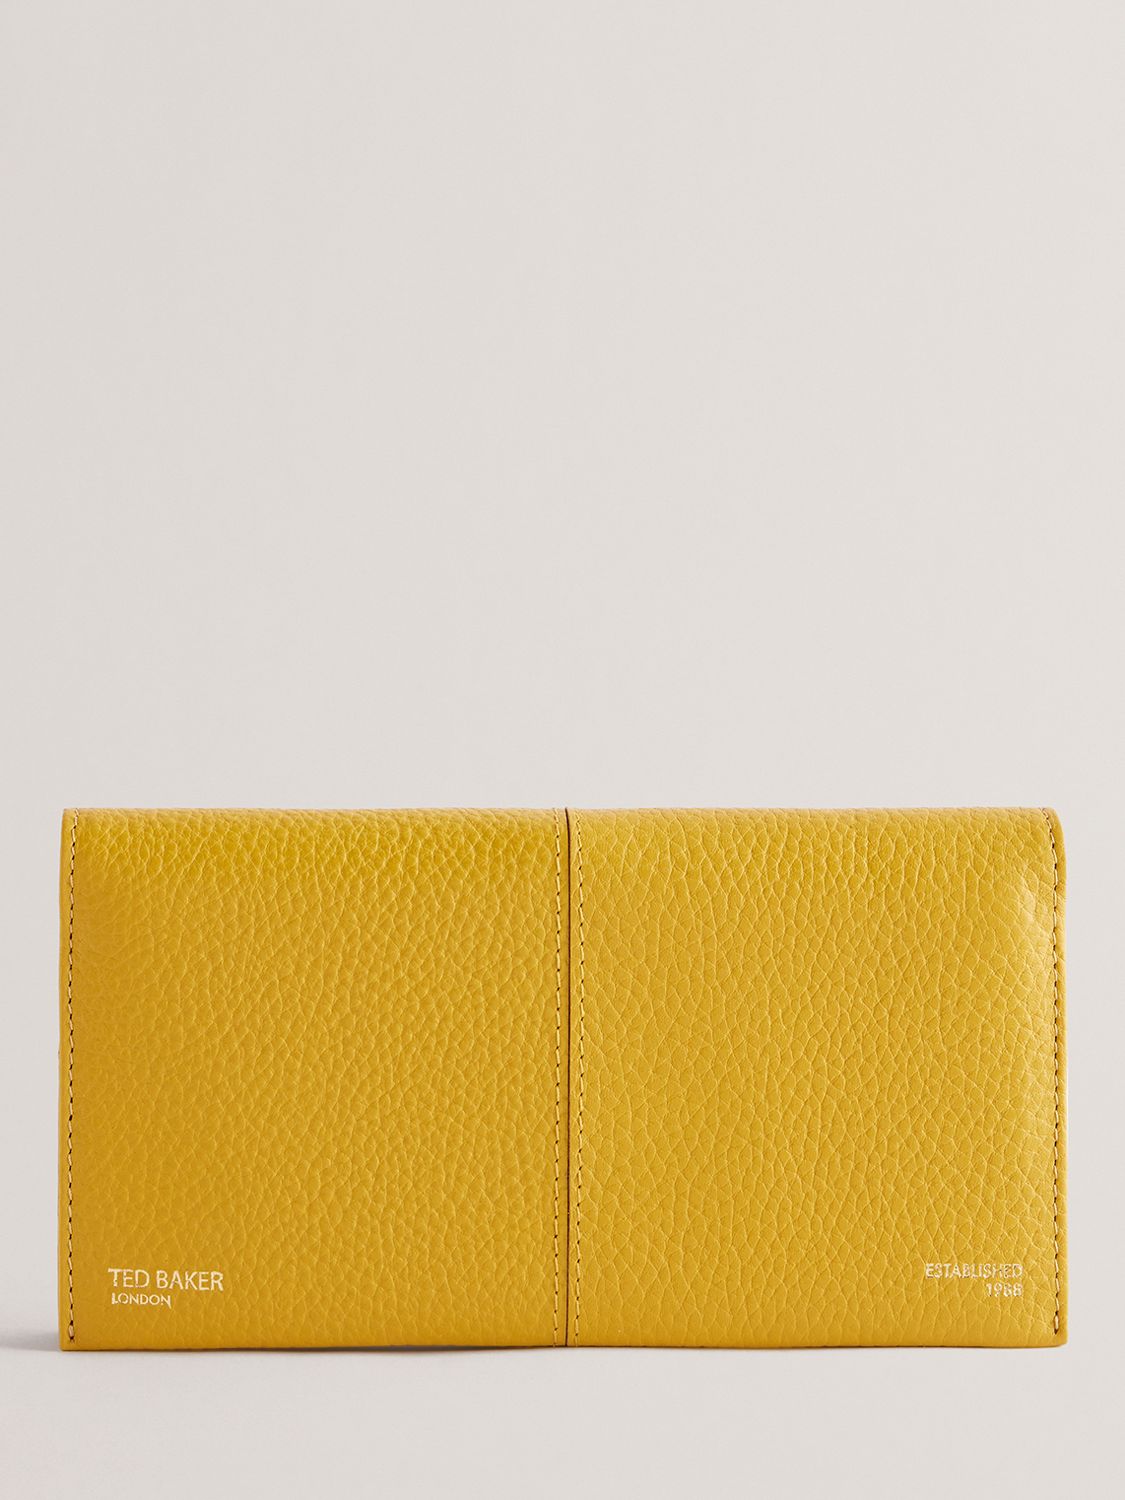 Buy Ted Baker Nishi Soft Grainy Leather Fold Purse, Yellow Dark Online at johnlewis.com